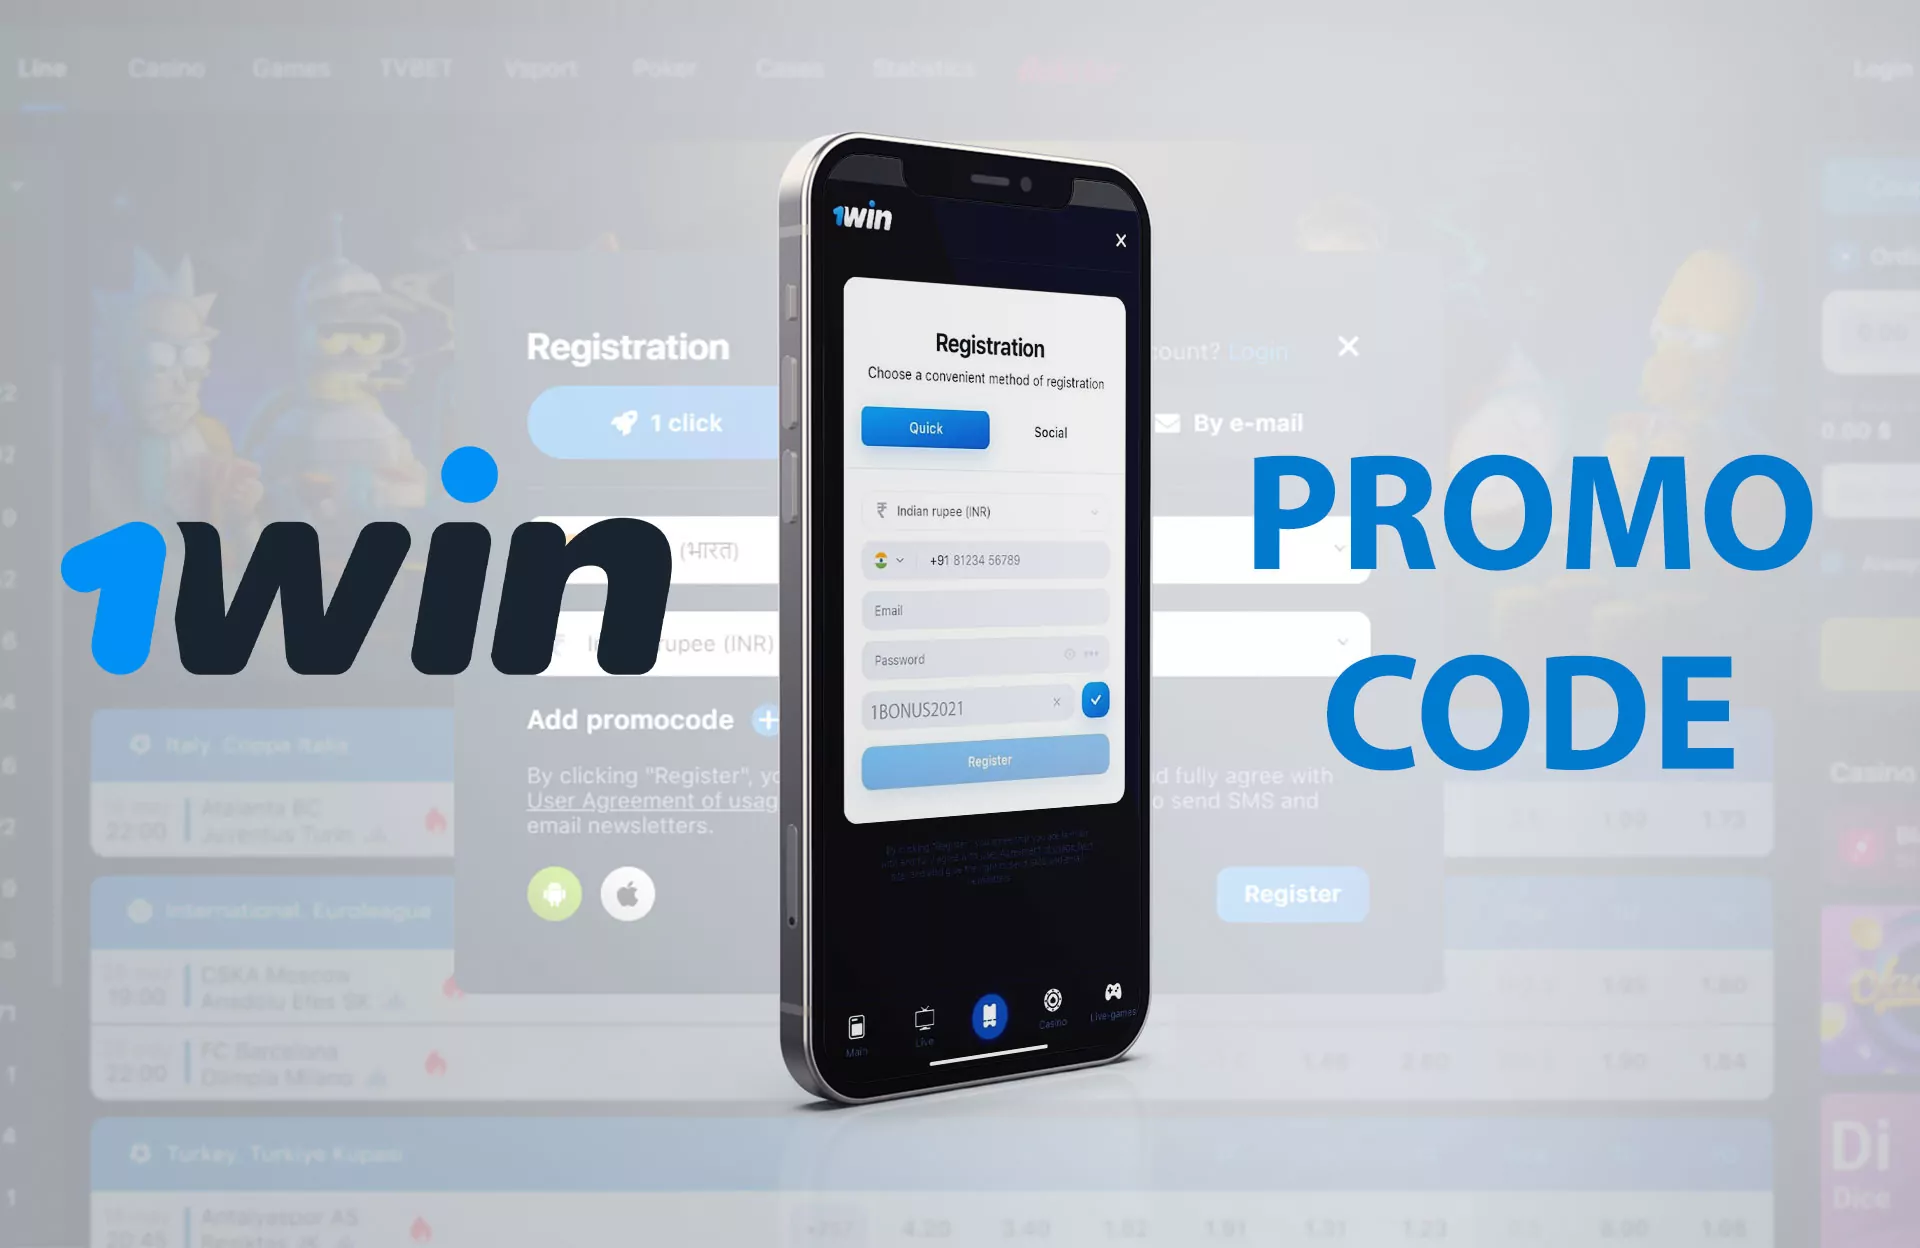 Use the 1win promo code during the registration and get a welcome bonus on betting.